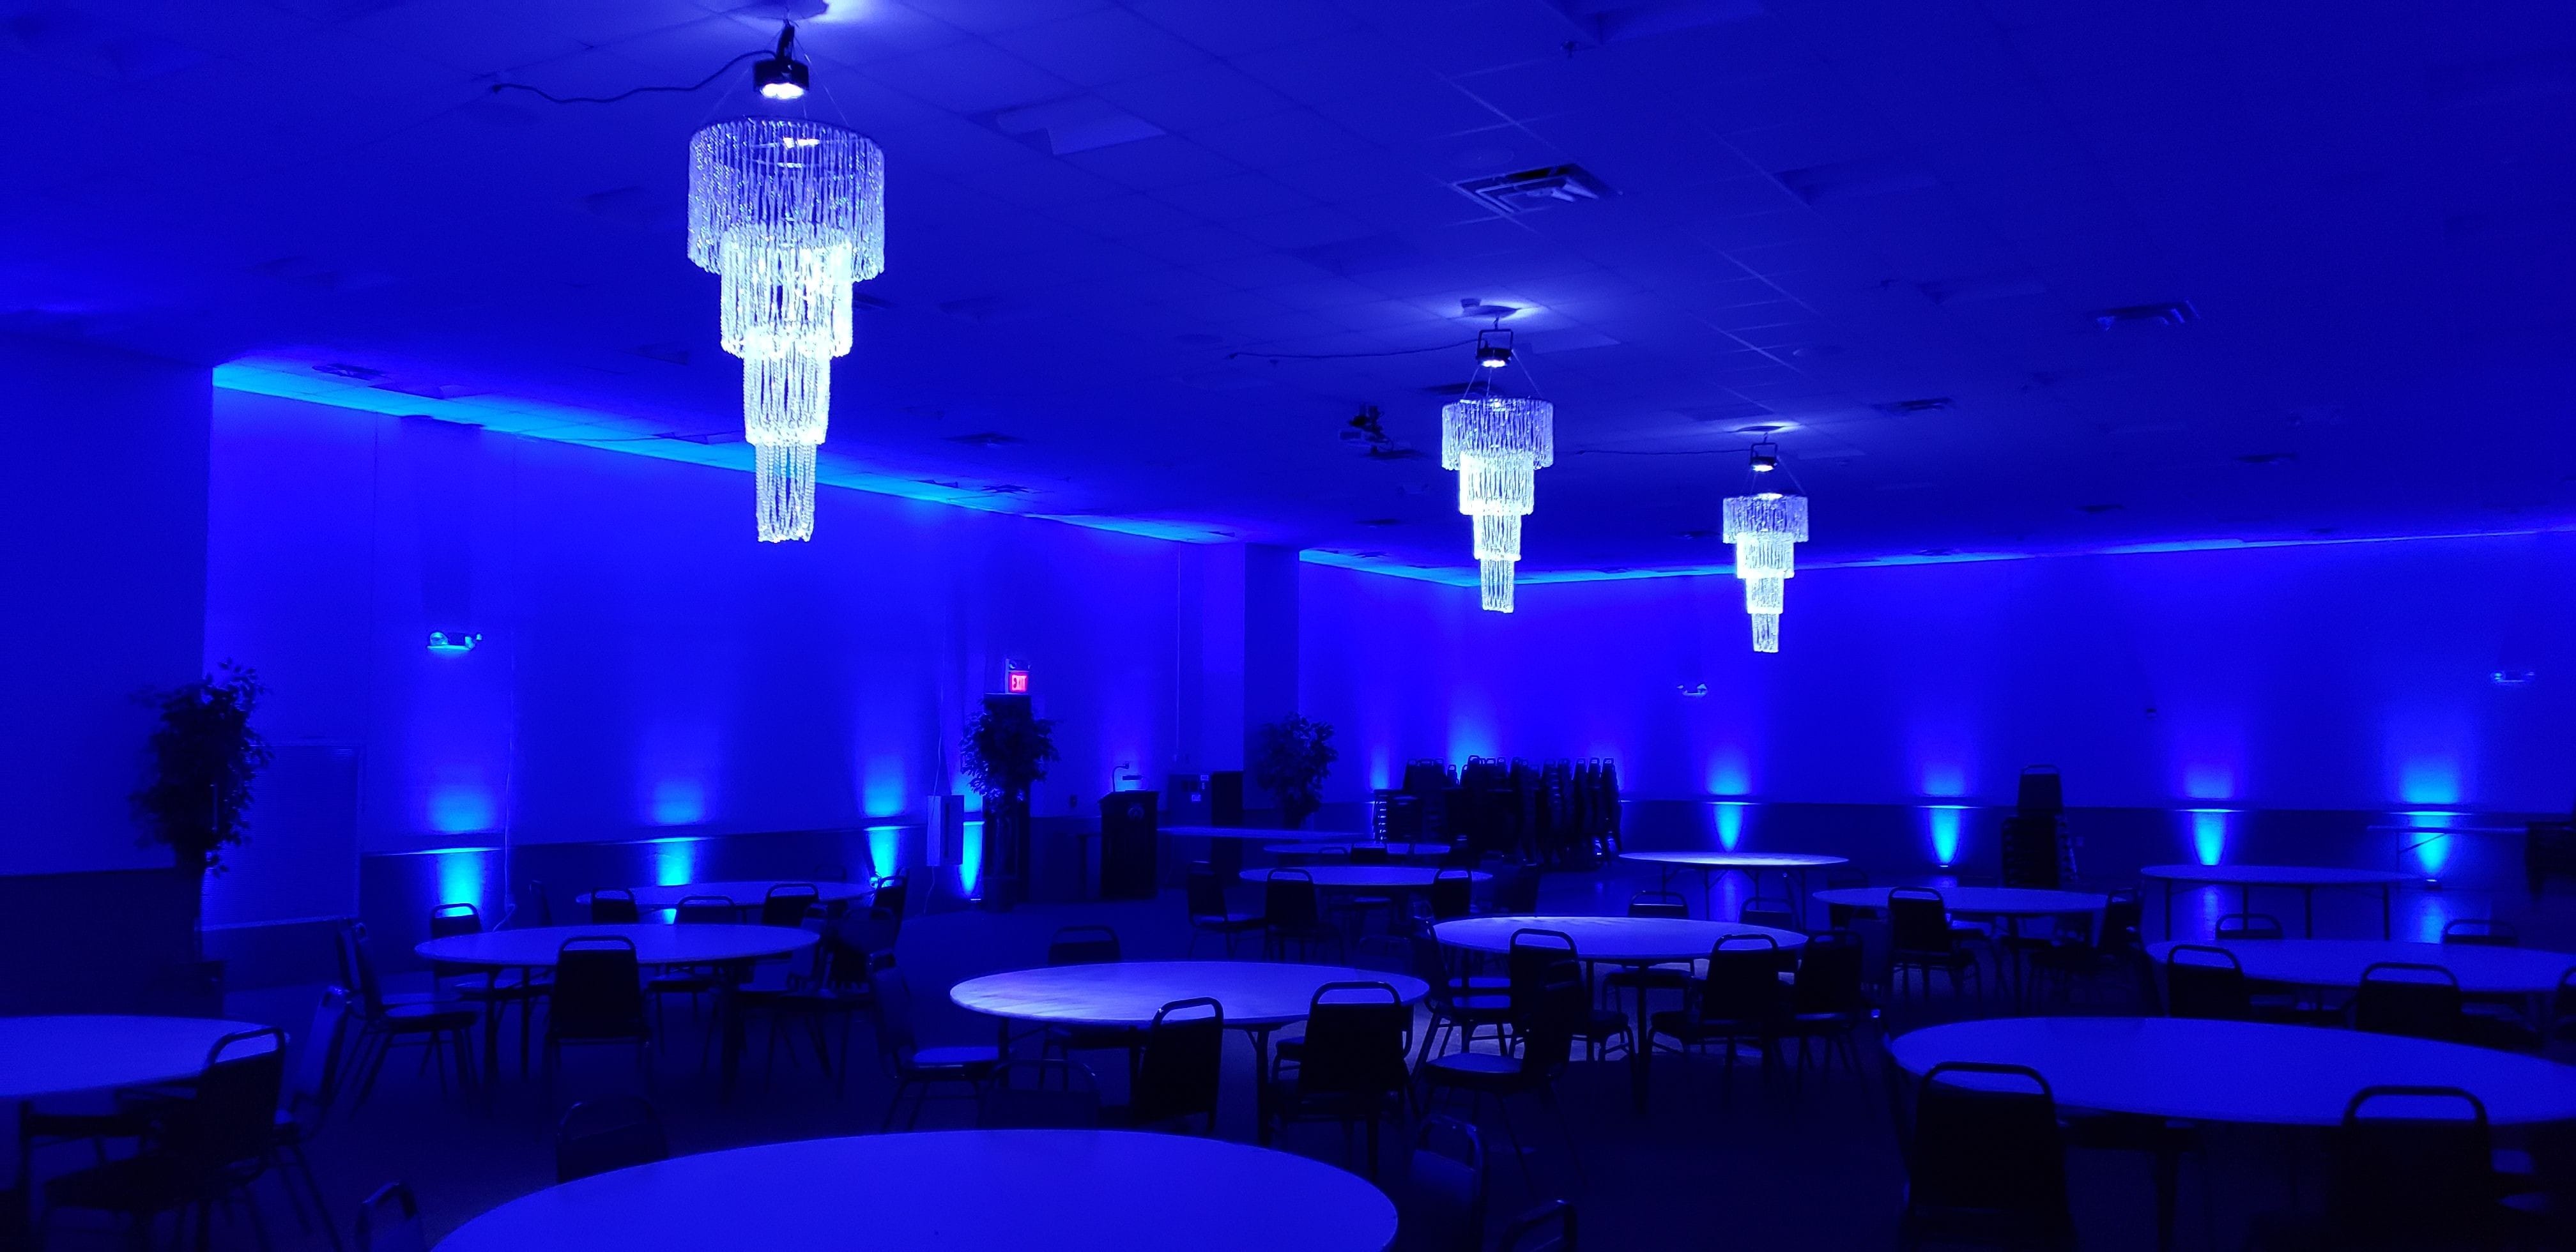 3 chandeliers with blue up lighting